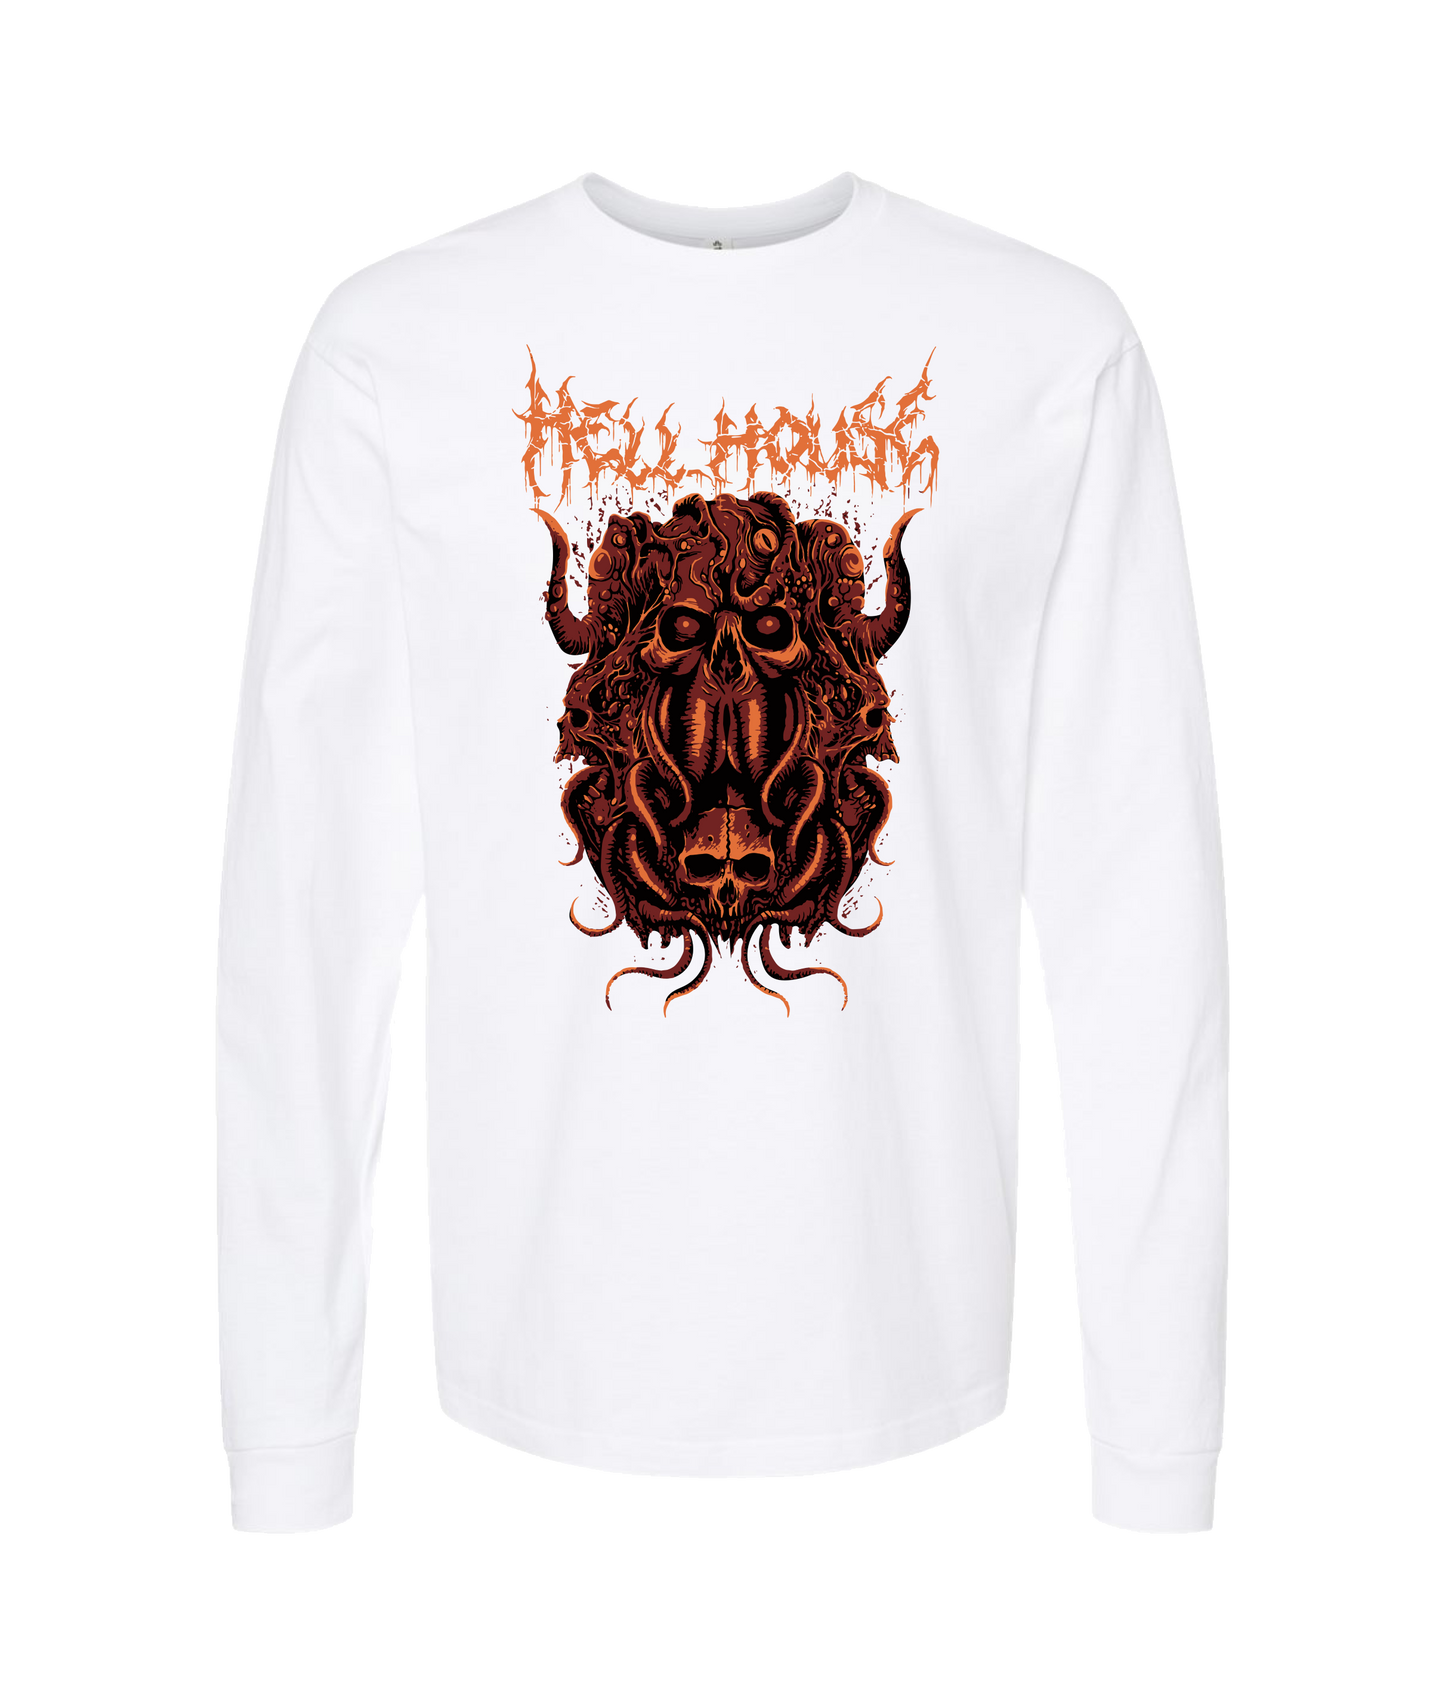 Hellhouse crypt - OCTOPUSSSKVLL - White Long Sleeve T